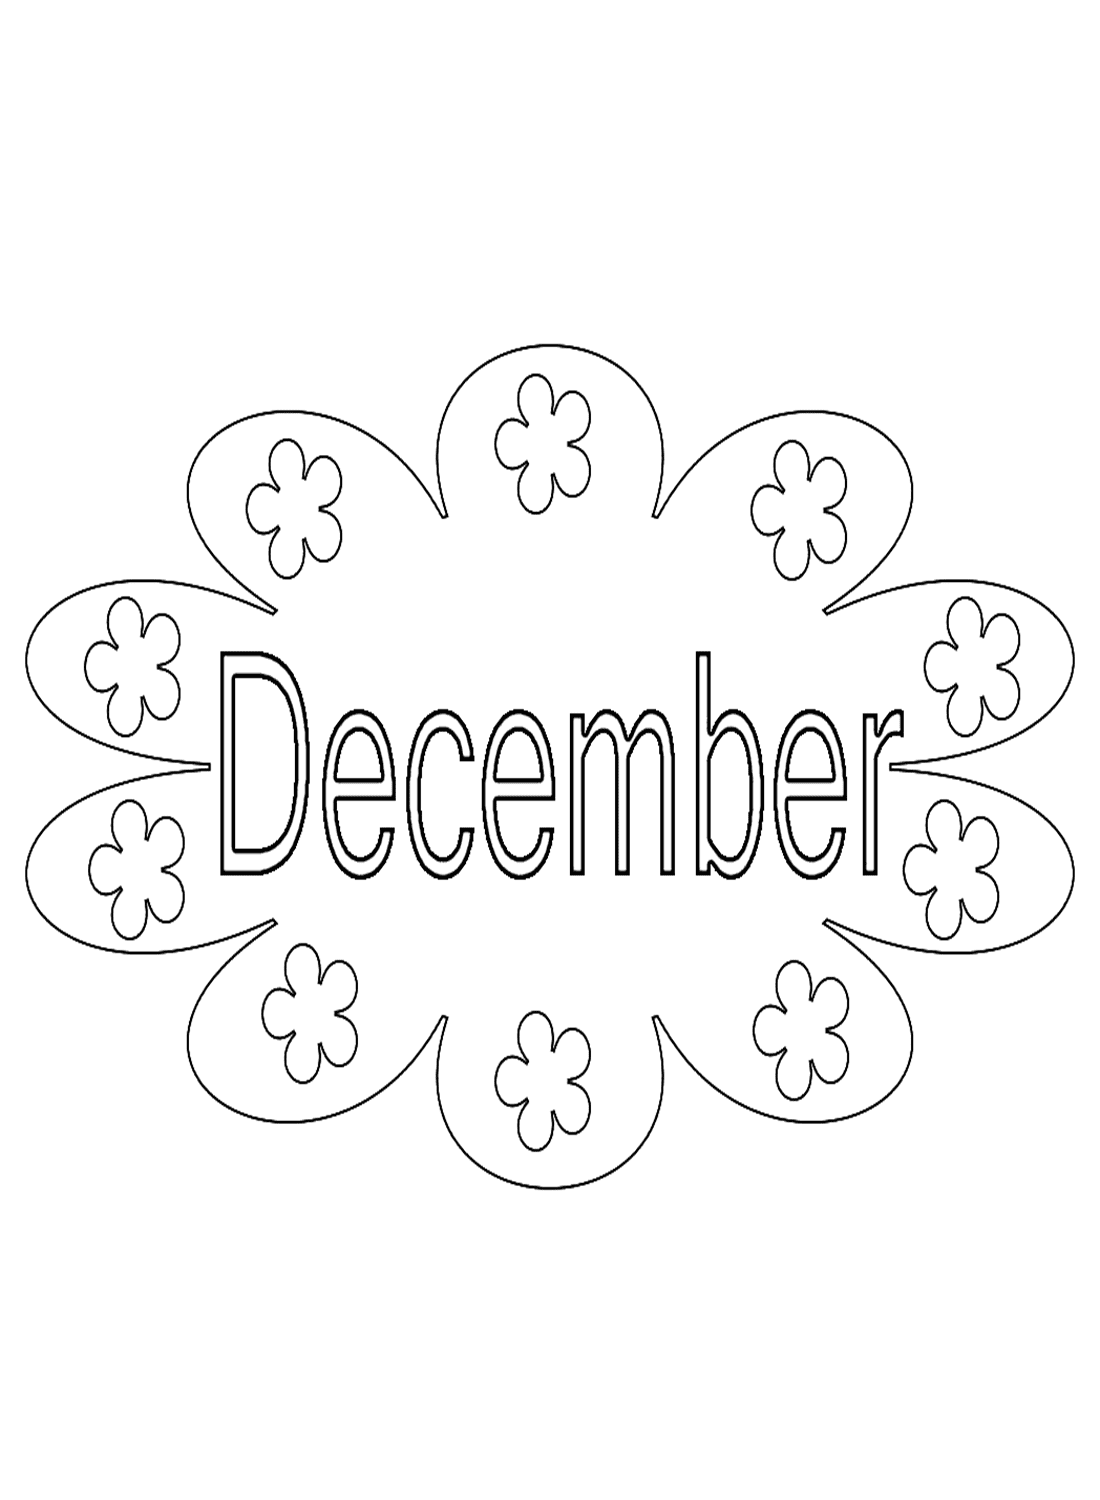 December Month Coloring Page